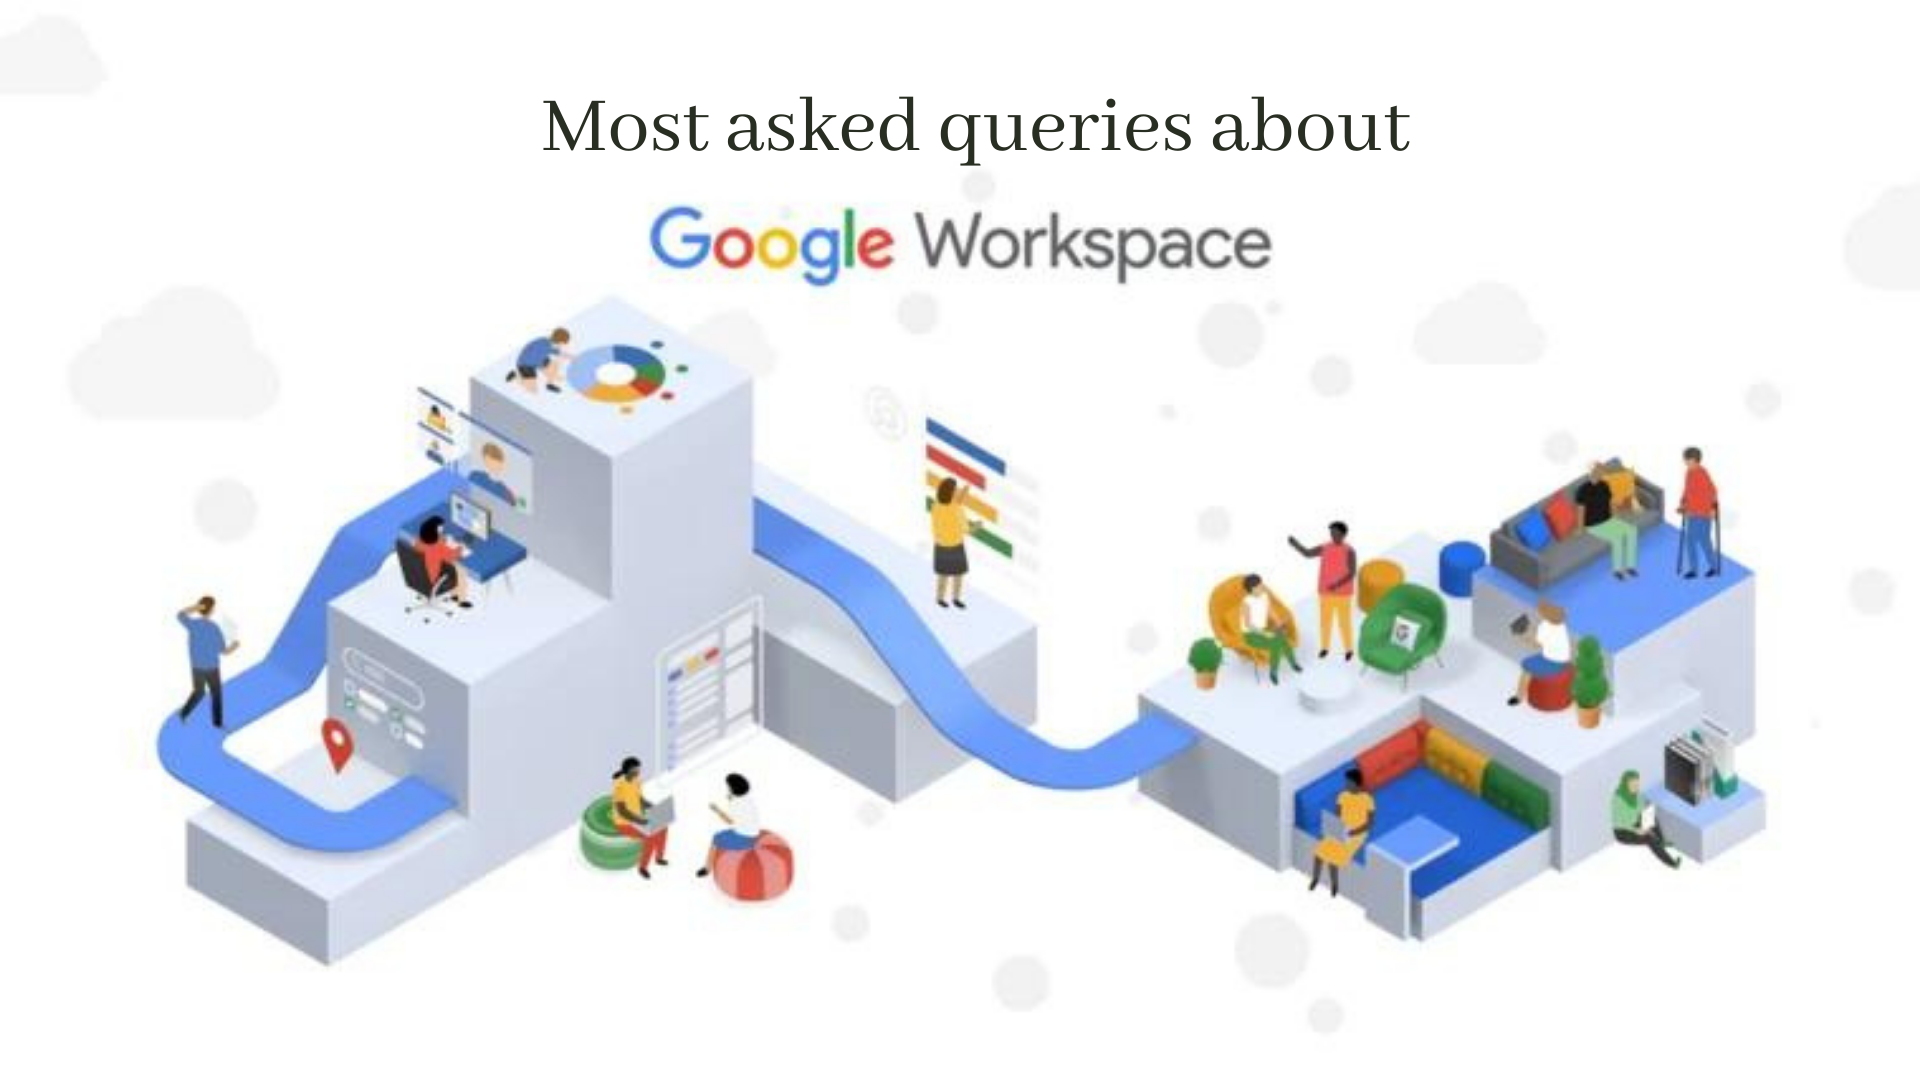 Top 10 Most asked queries about Google workspace in 2022